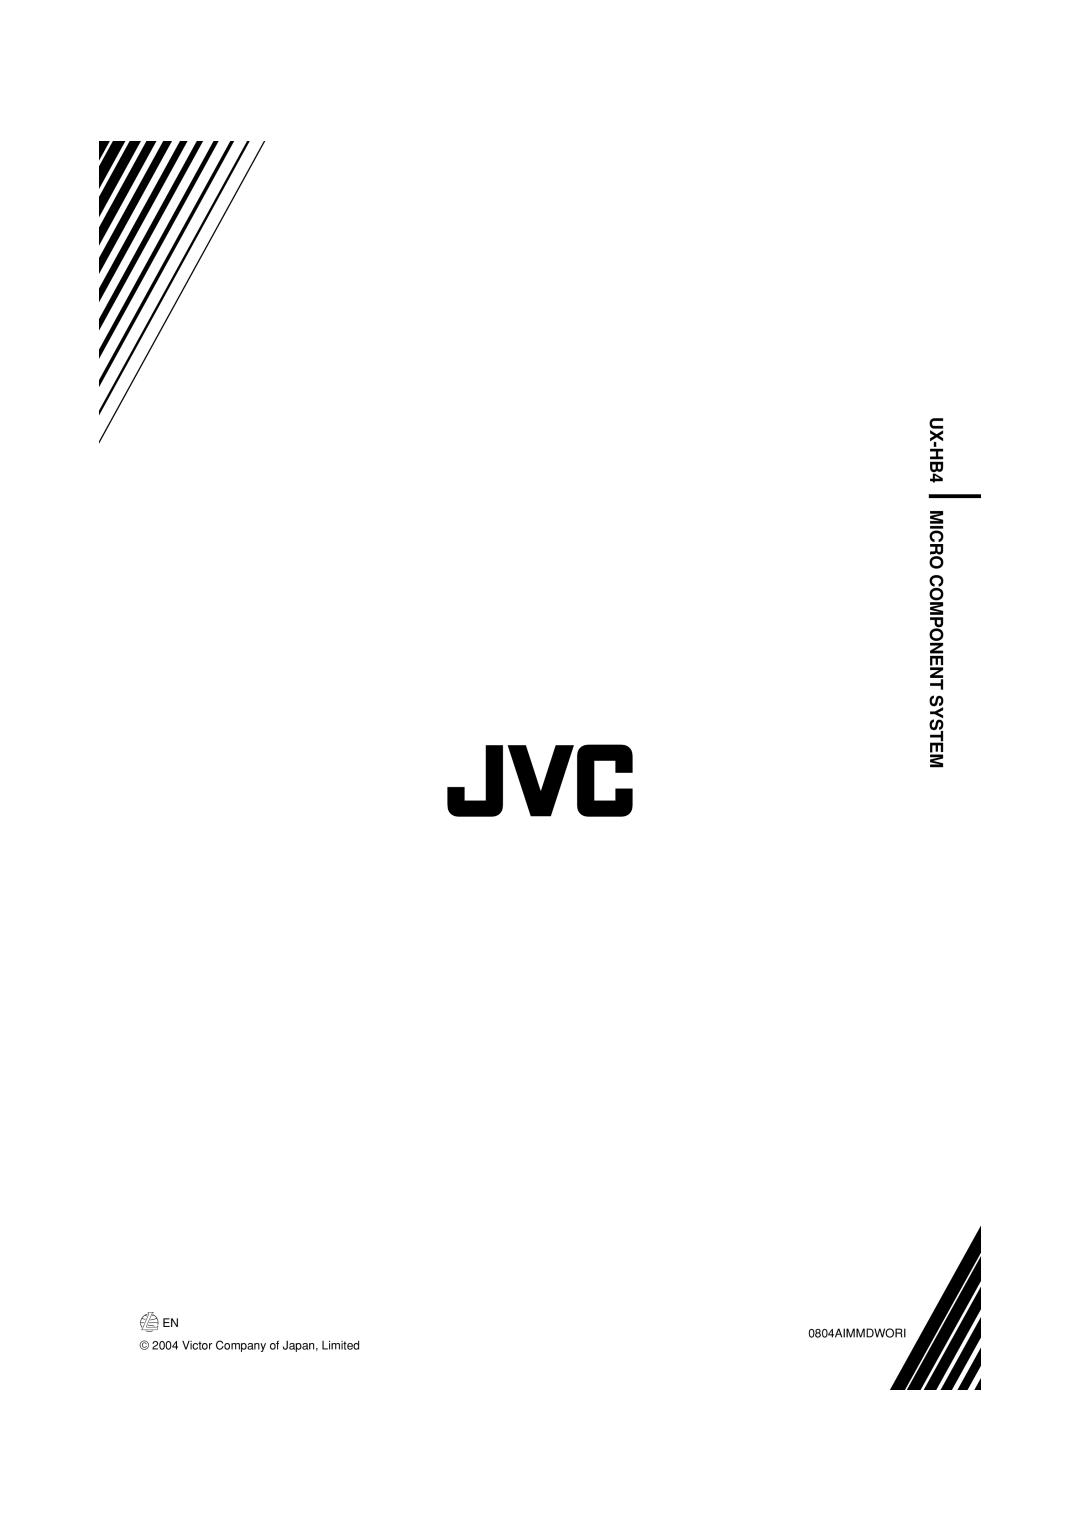 JVC LVT1266-001A manual UX-HB4MICRO COMPONENT SYSTEM, EN 0804AIMMDWORI, Victor Company of Japan, Limited 